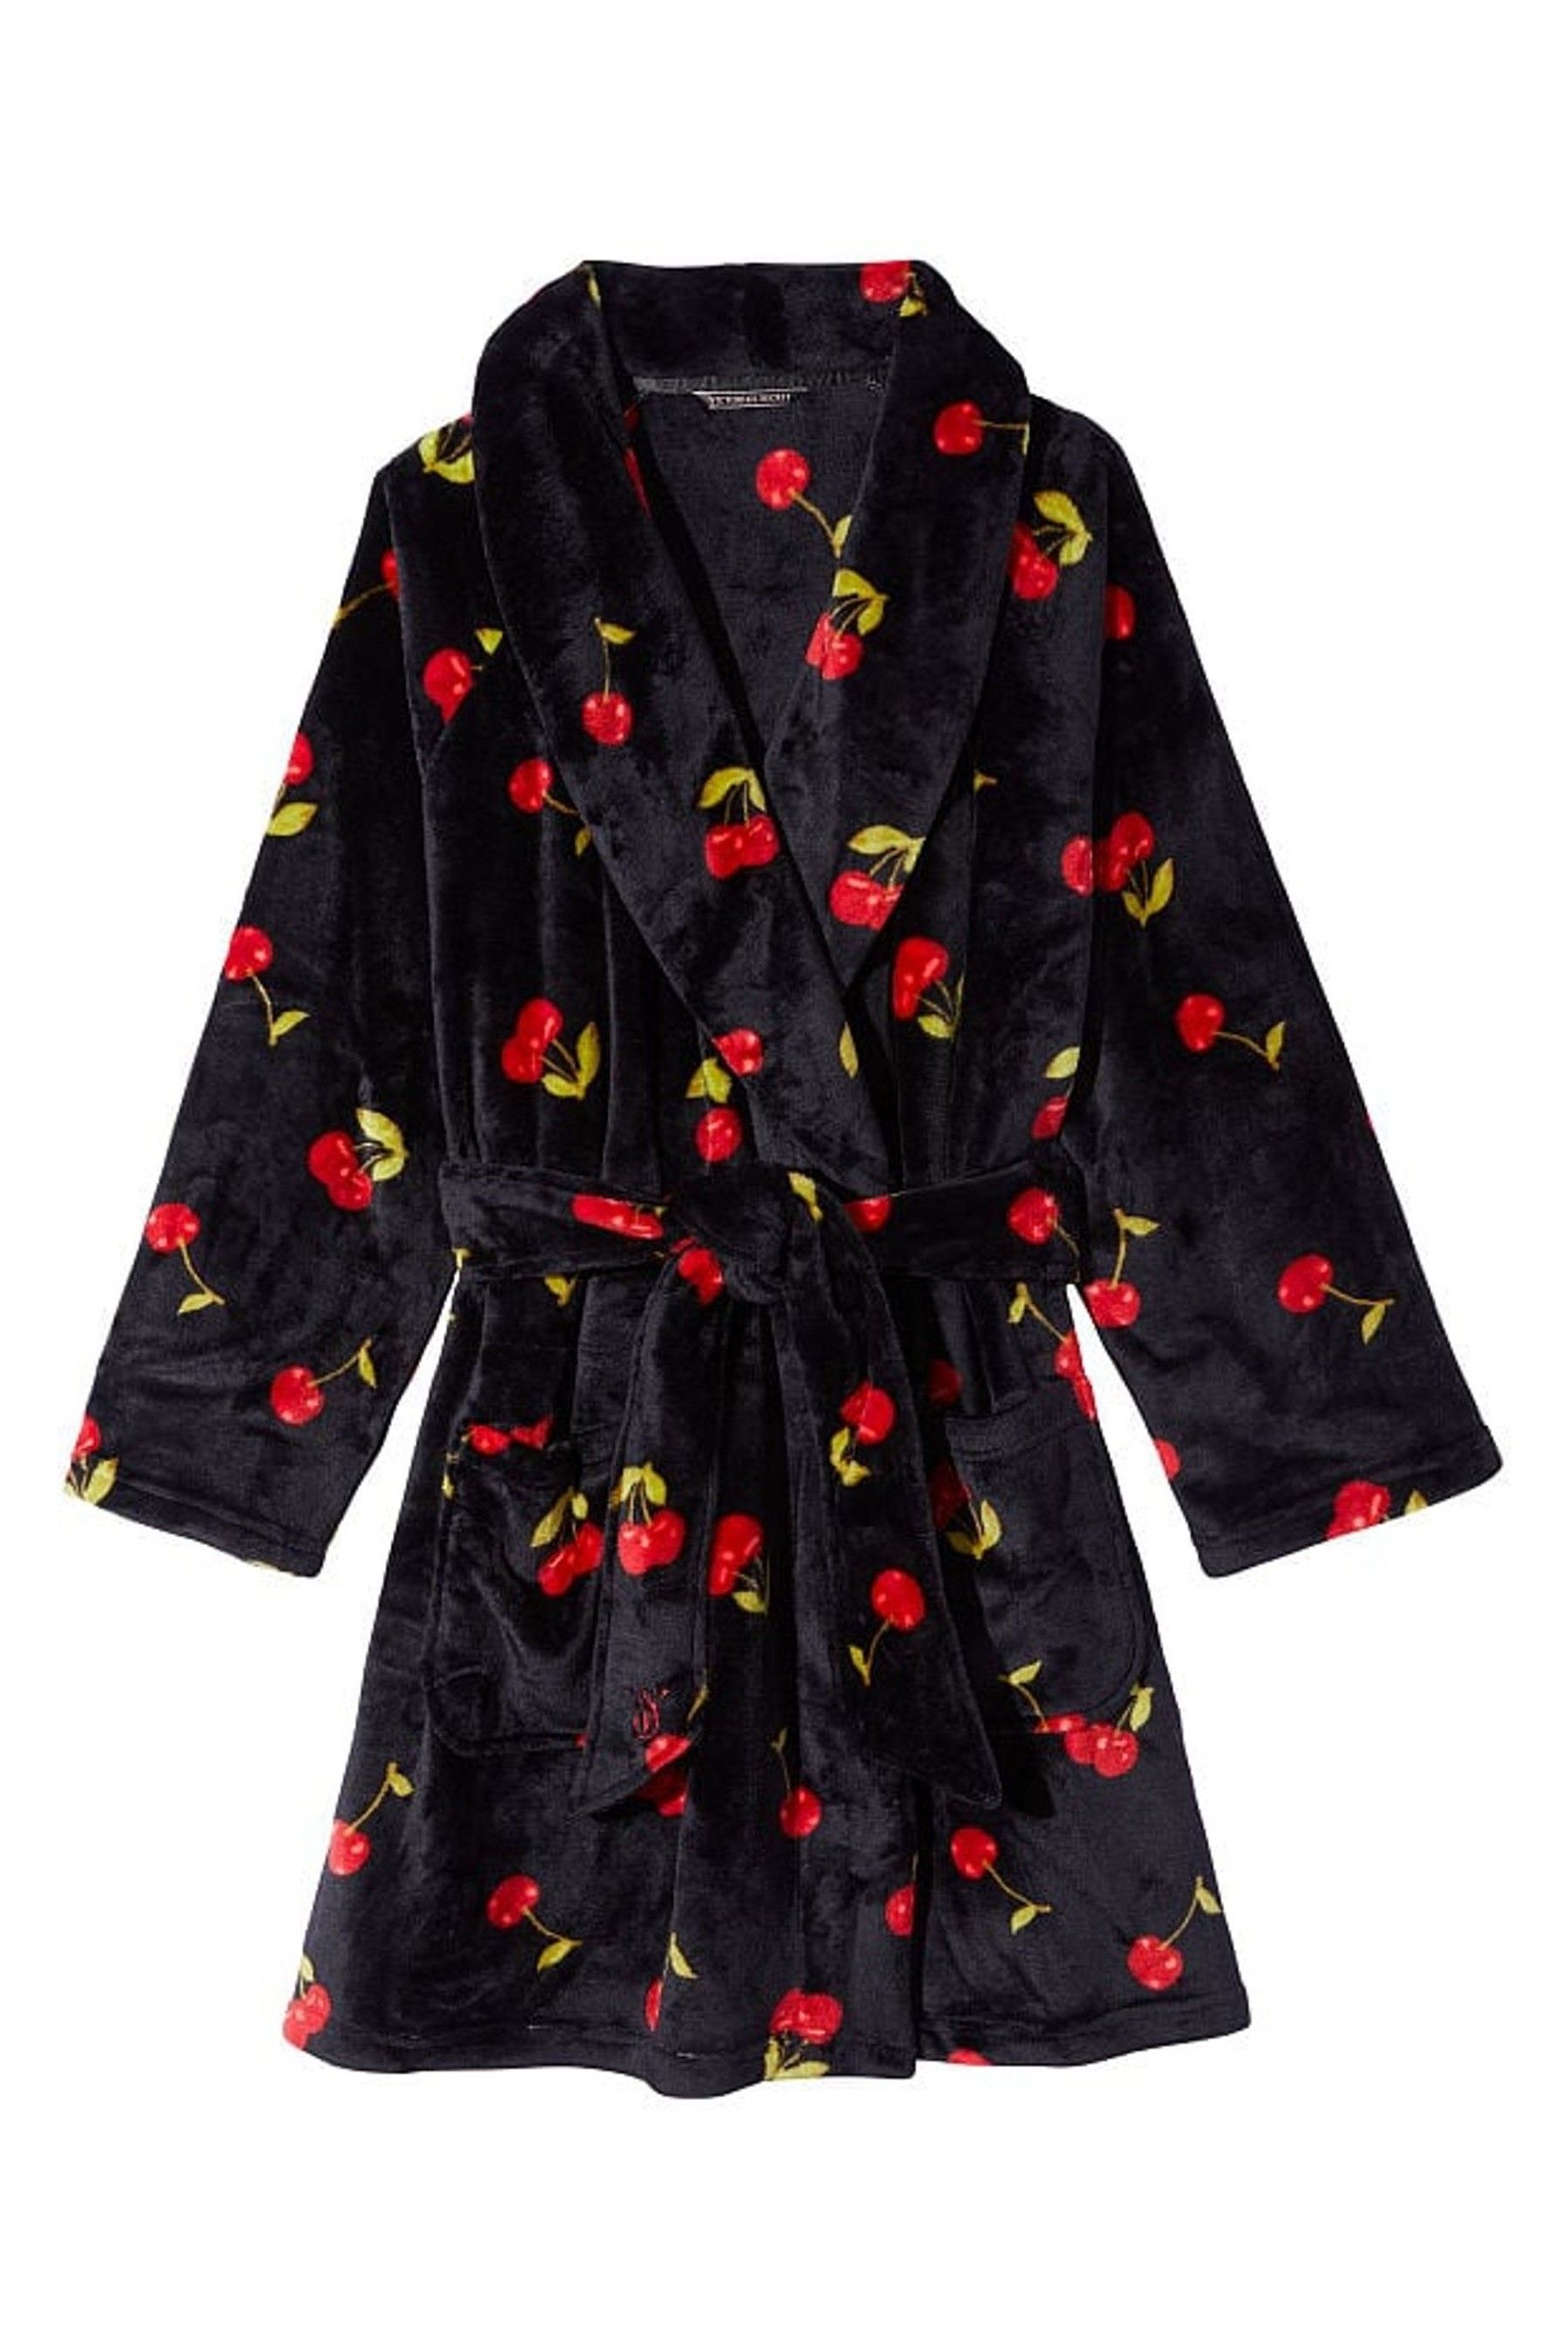 Buy Victoria's Secret Cosy Short Dressing Gown from the Victoria's ...